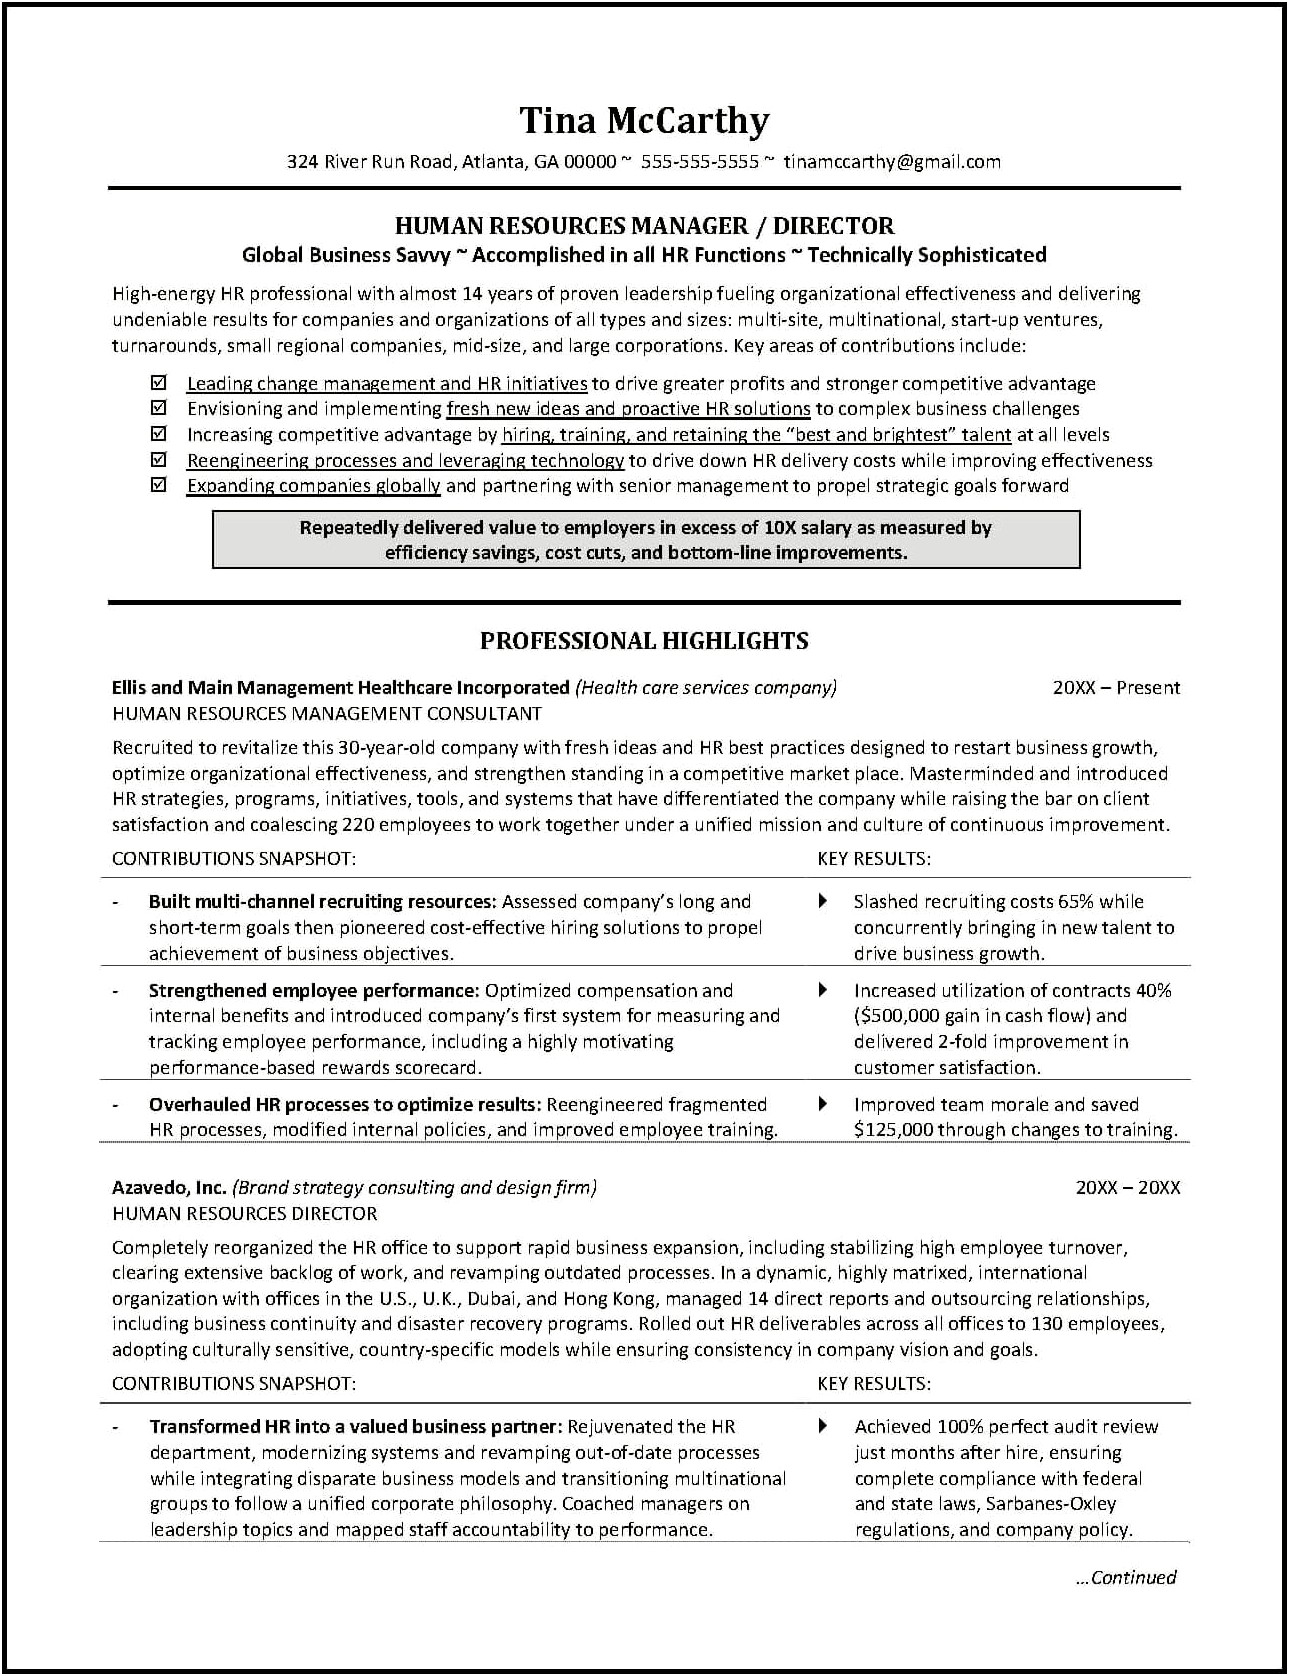 Resume Template For Entry Blue Collar Worker